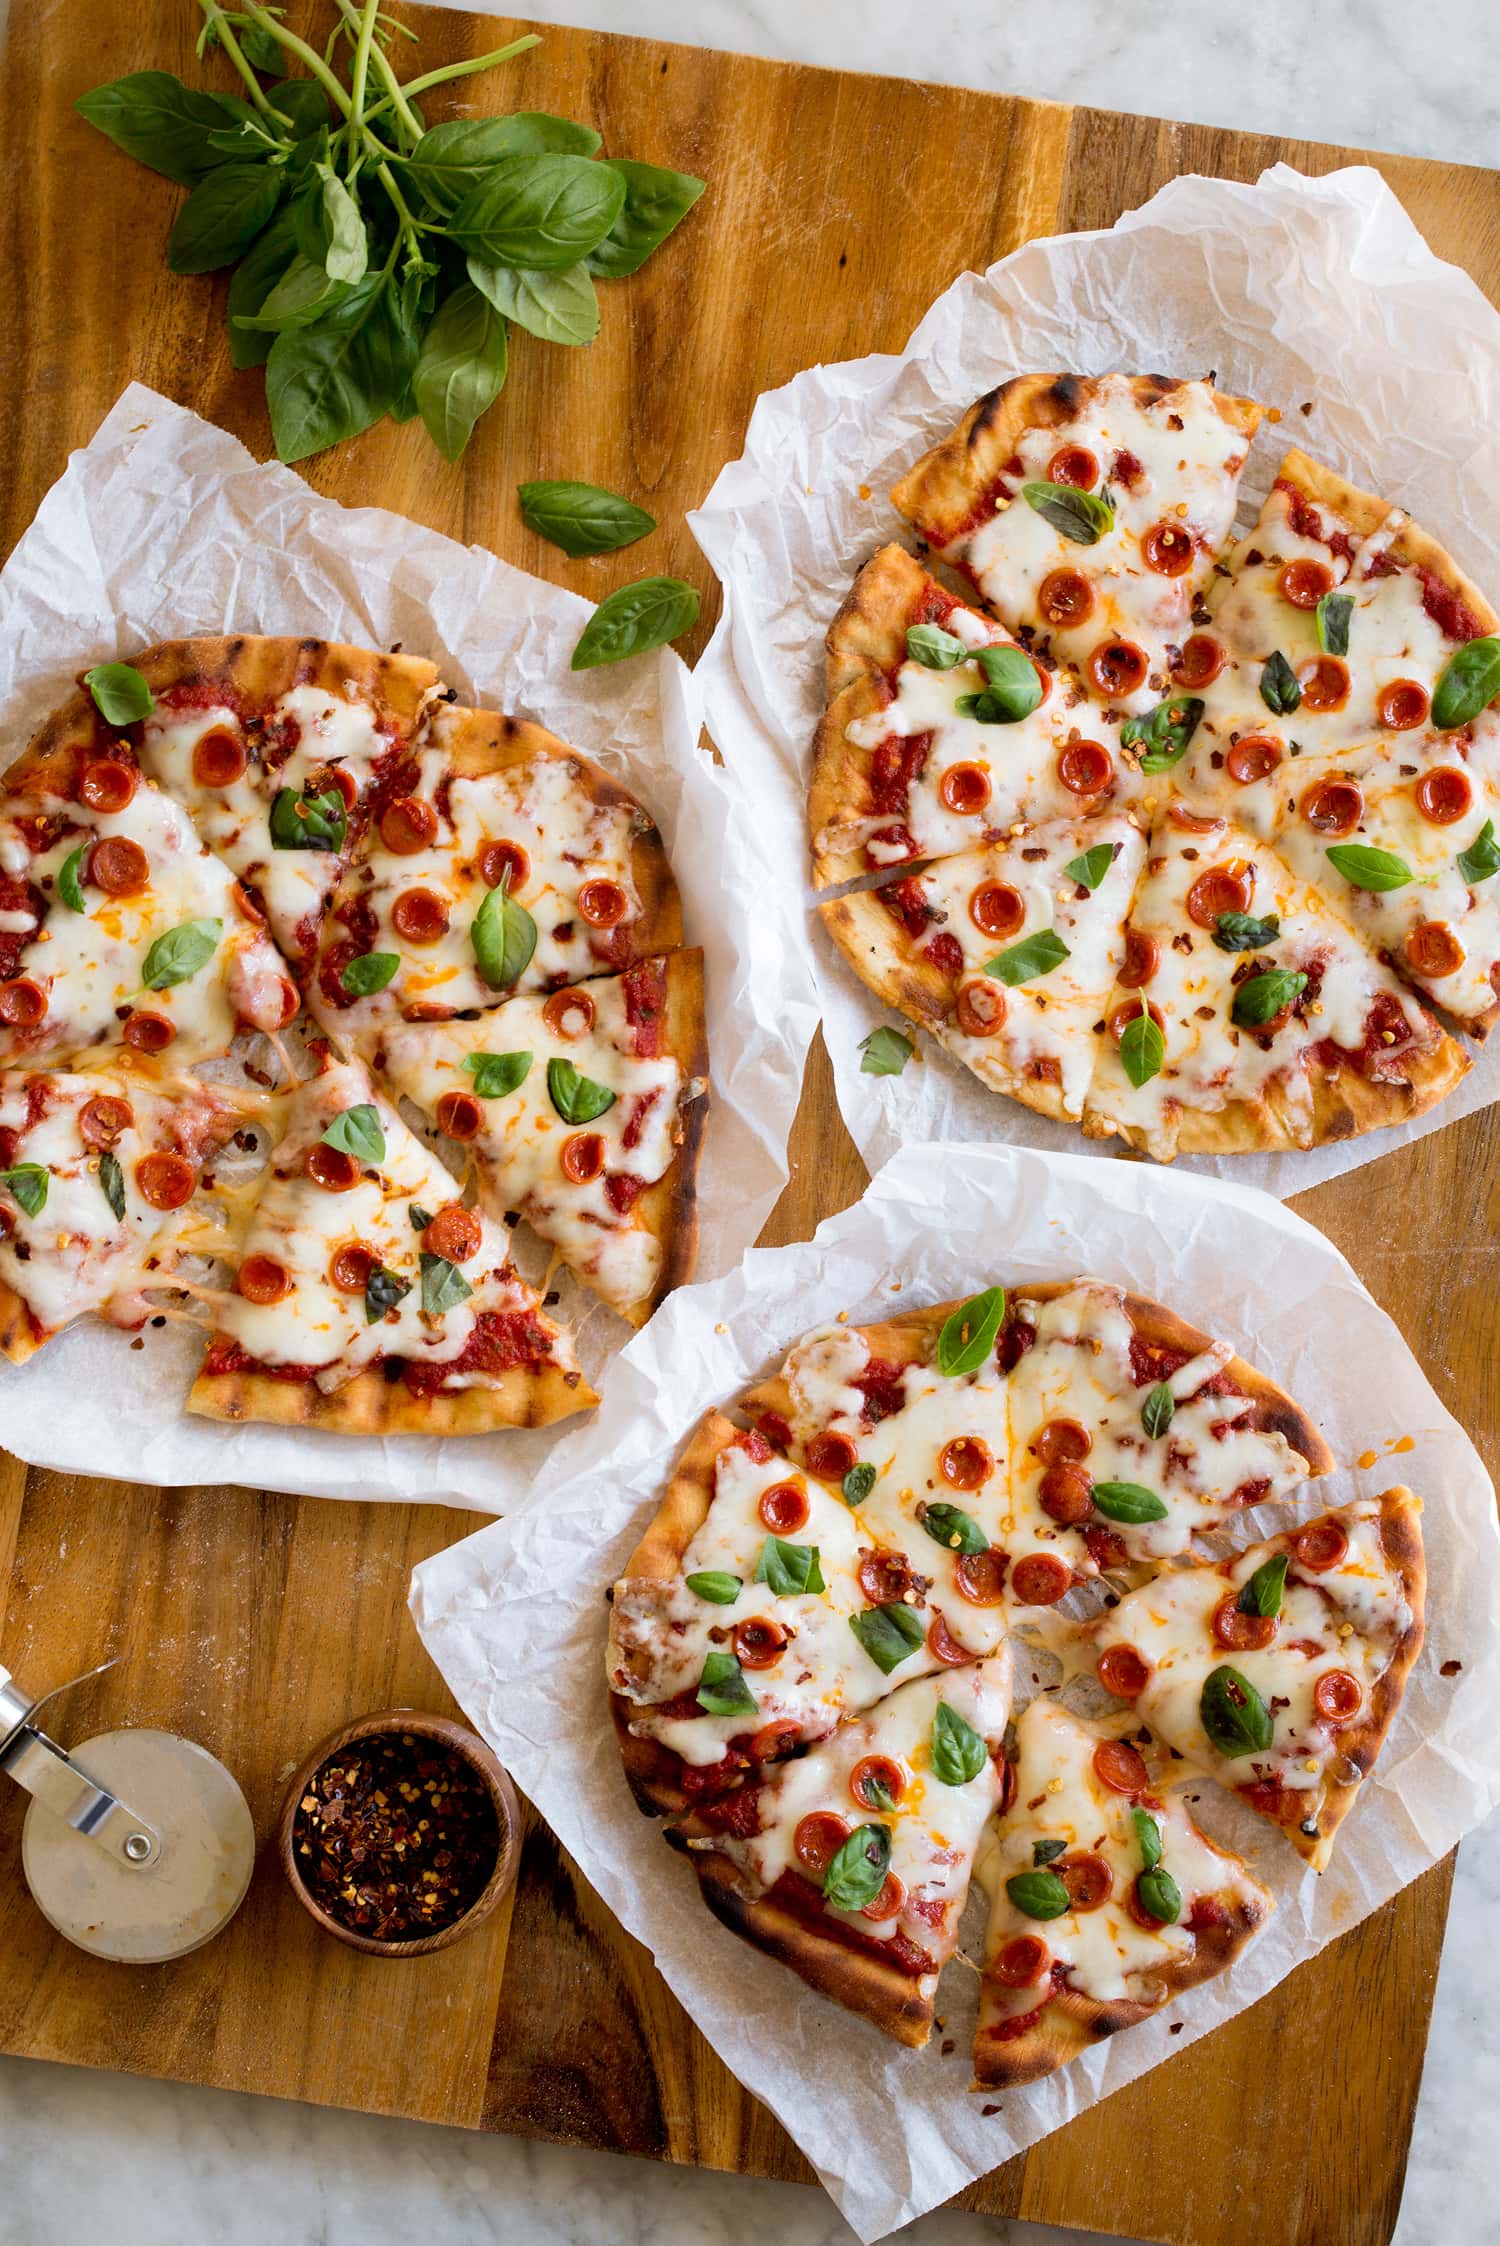 Grilled individual pizzas topped with mozzarella, pepperoni and basil.